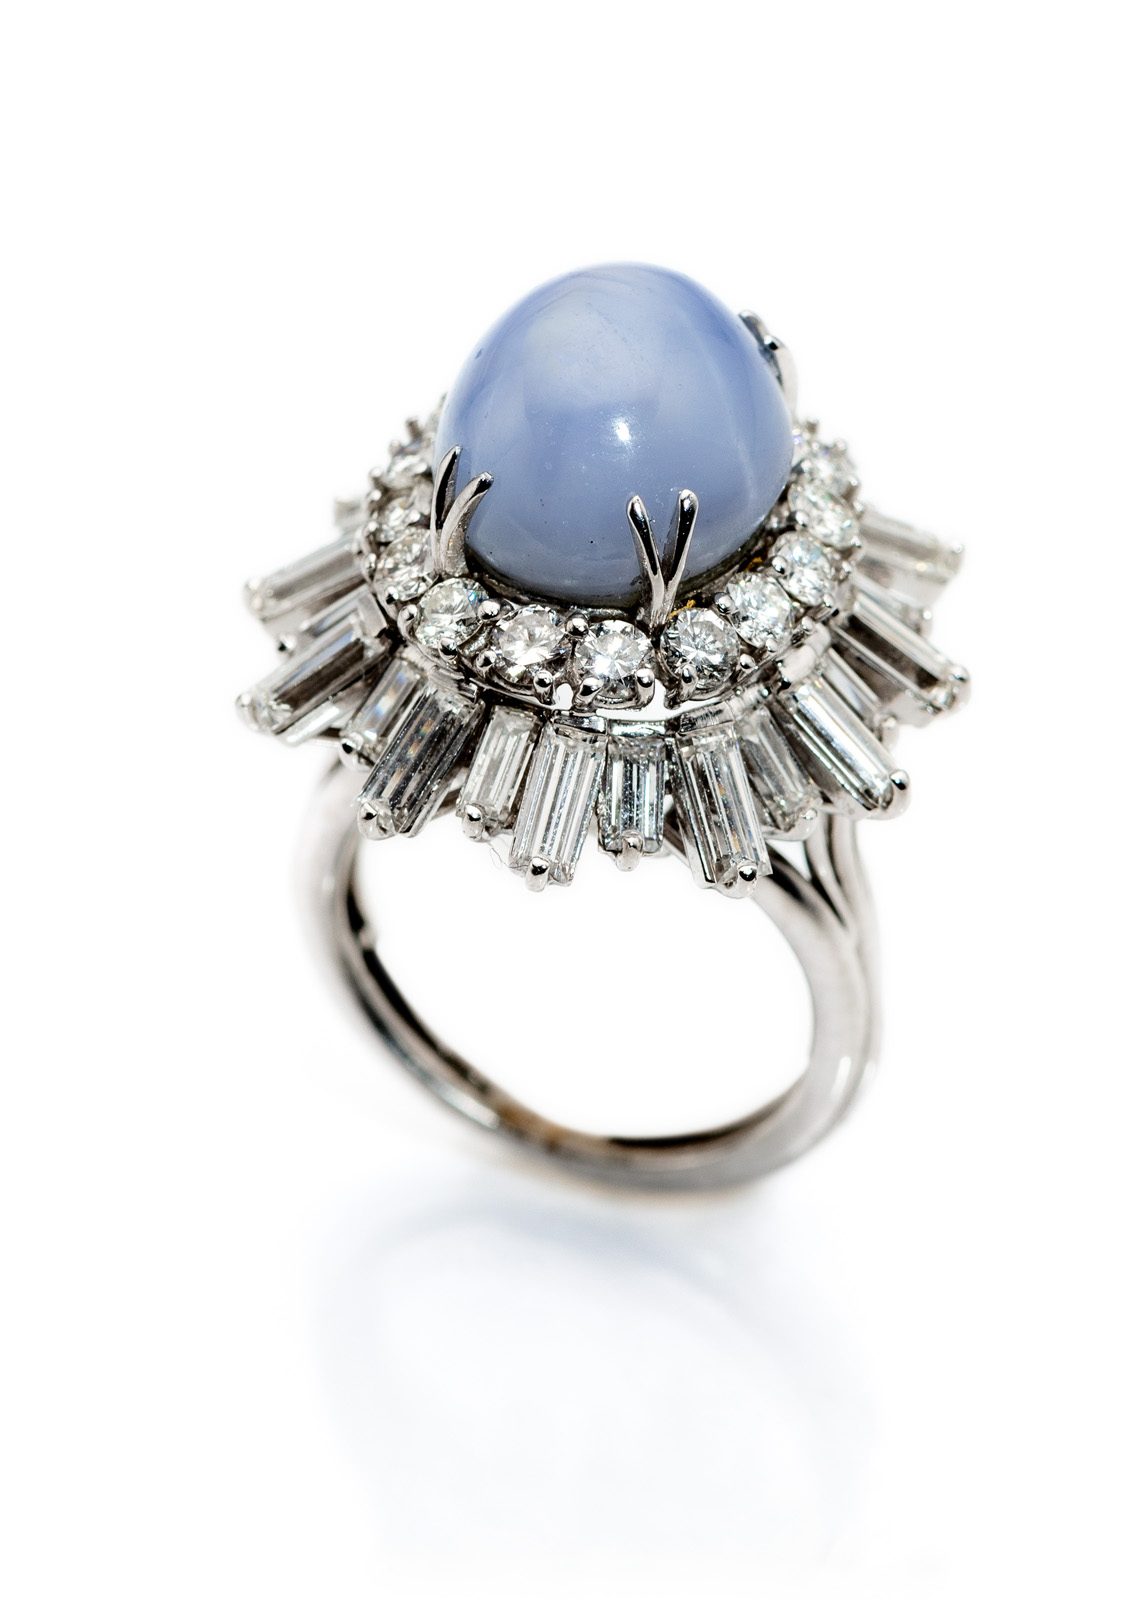 <b>A RING WITH STAR SAPPHIRE AND DIAMONDS</b>